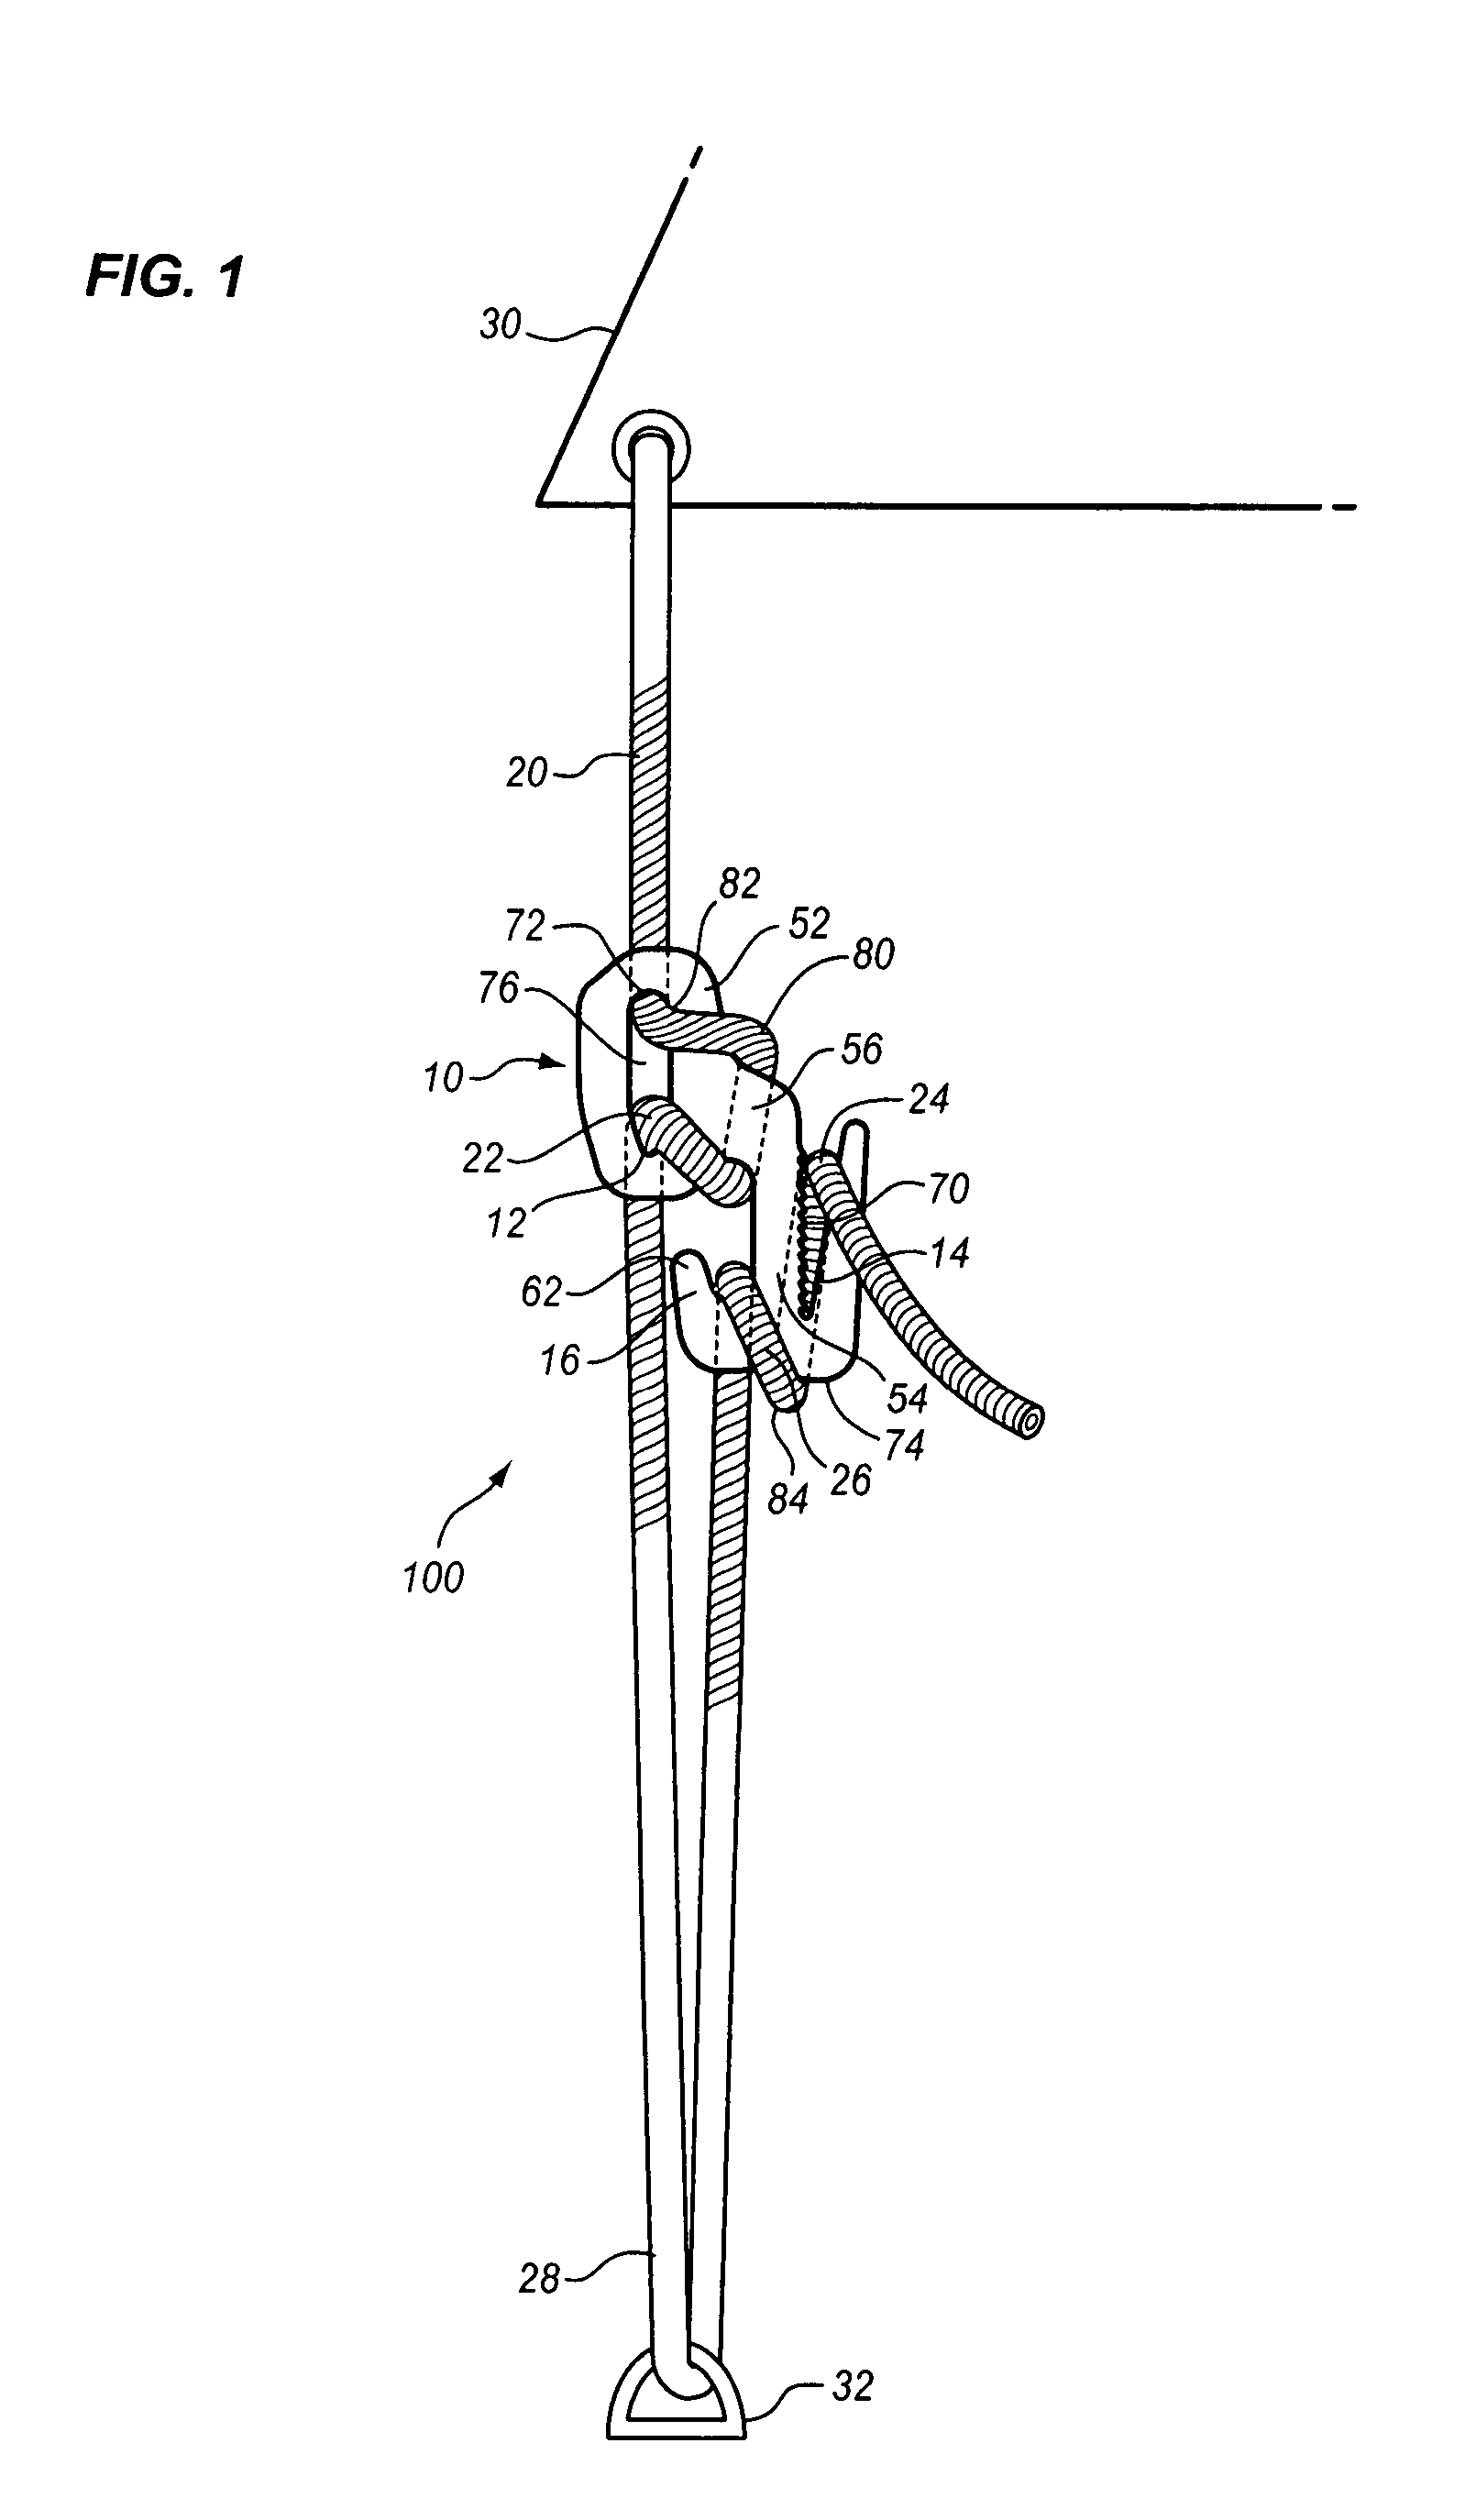 Tie-down and tensioning system